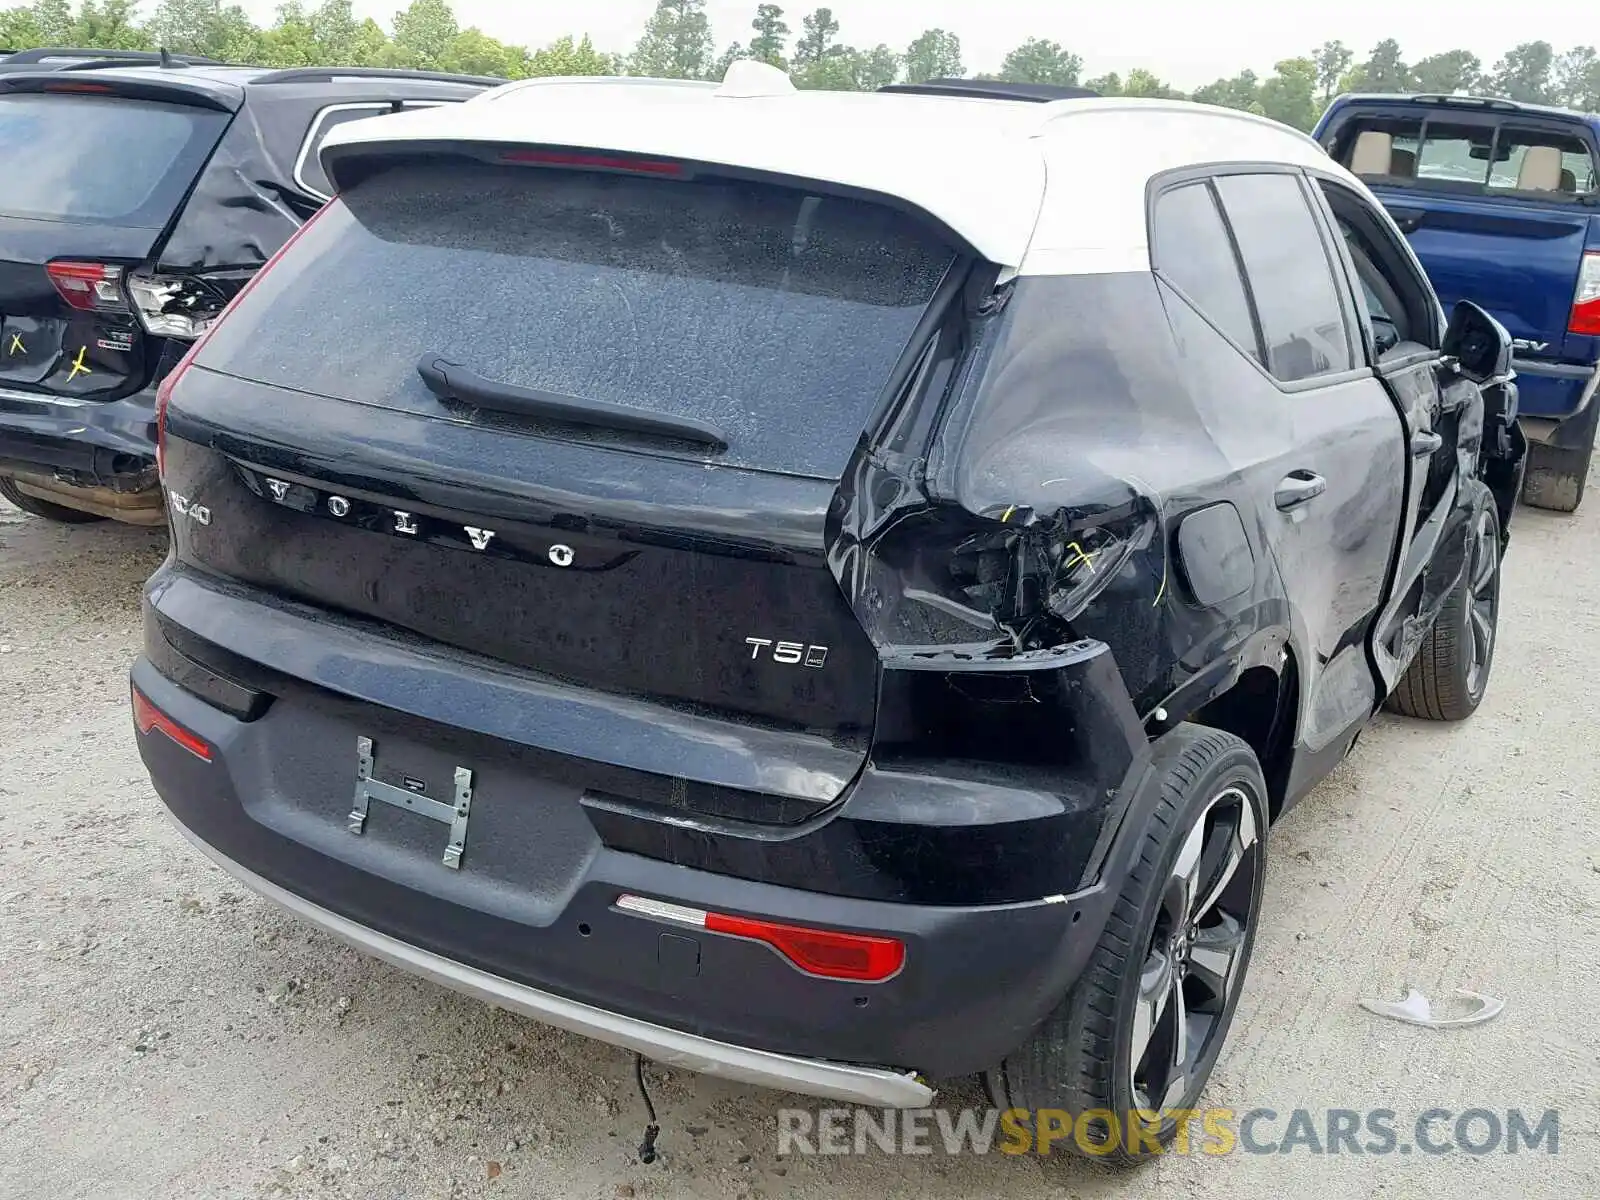 4 Photograph of a damaged car YV4162UK2K2057993 VOLVO XC40 T5 2019